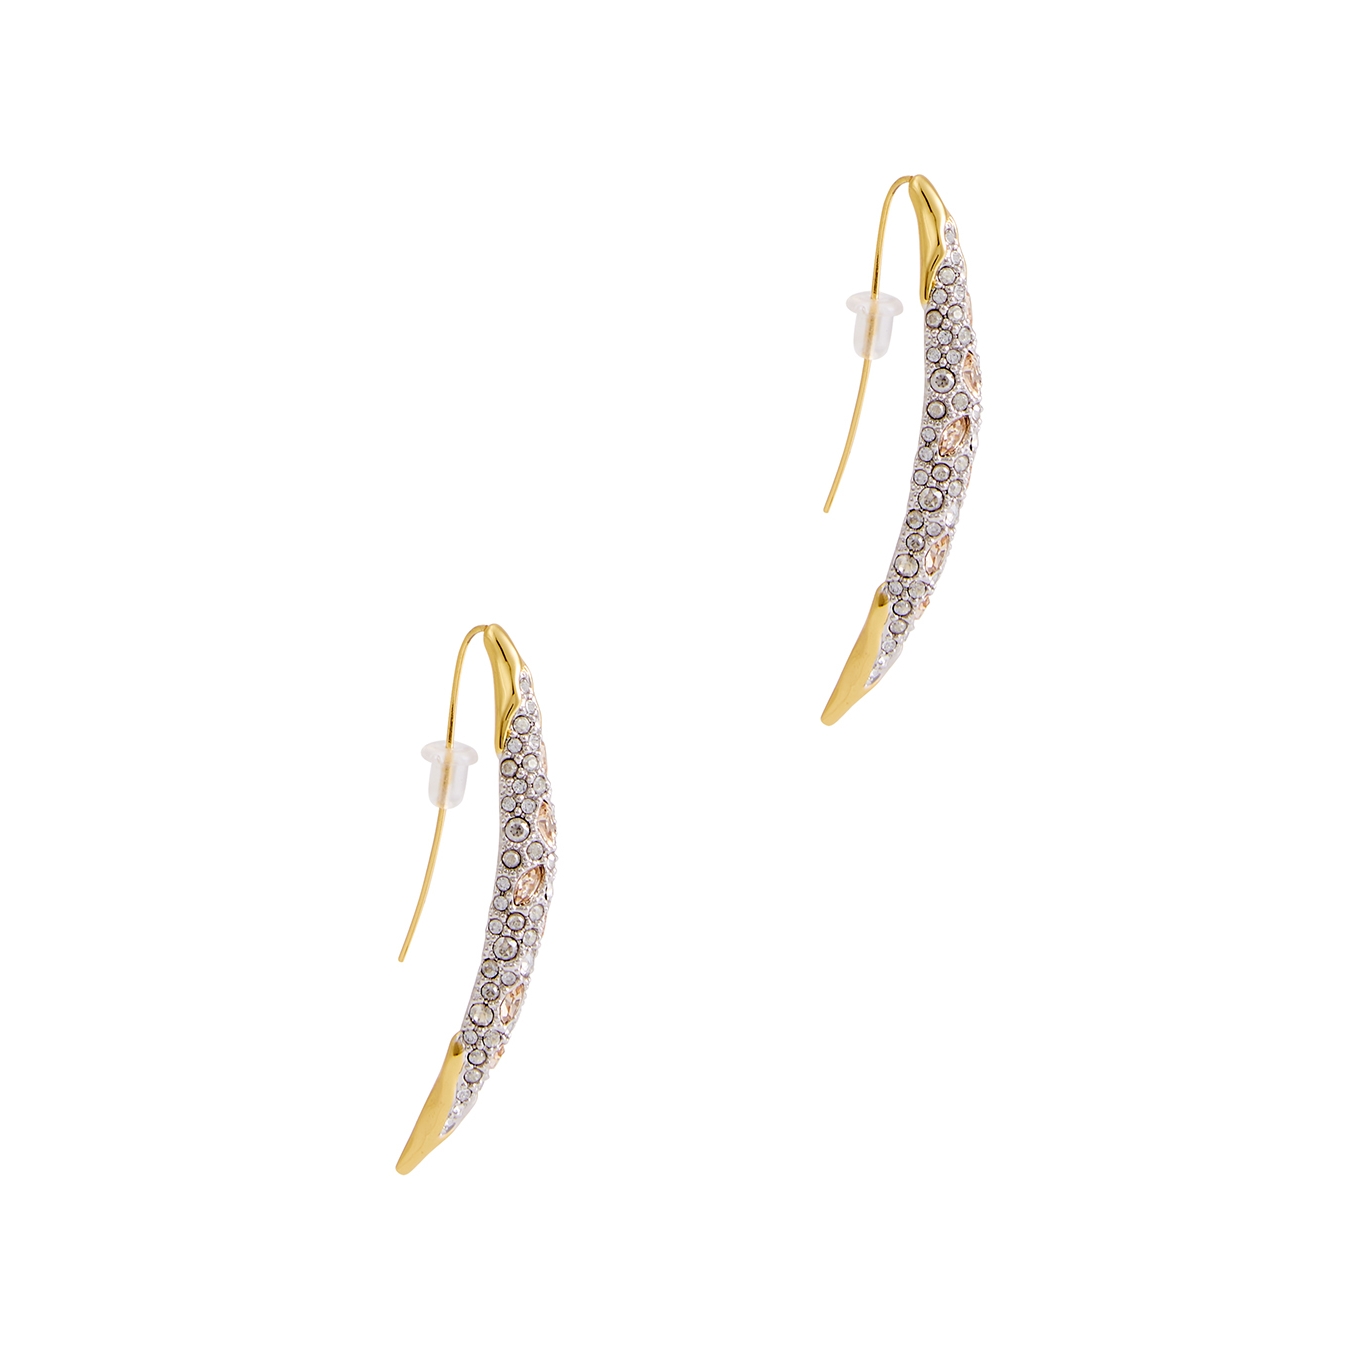 Alexis Bittar Solanales Embellished 14kt Gold-plated Drop Earrings